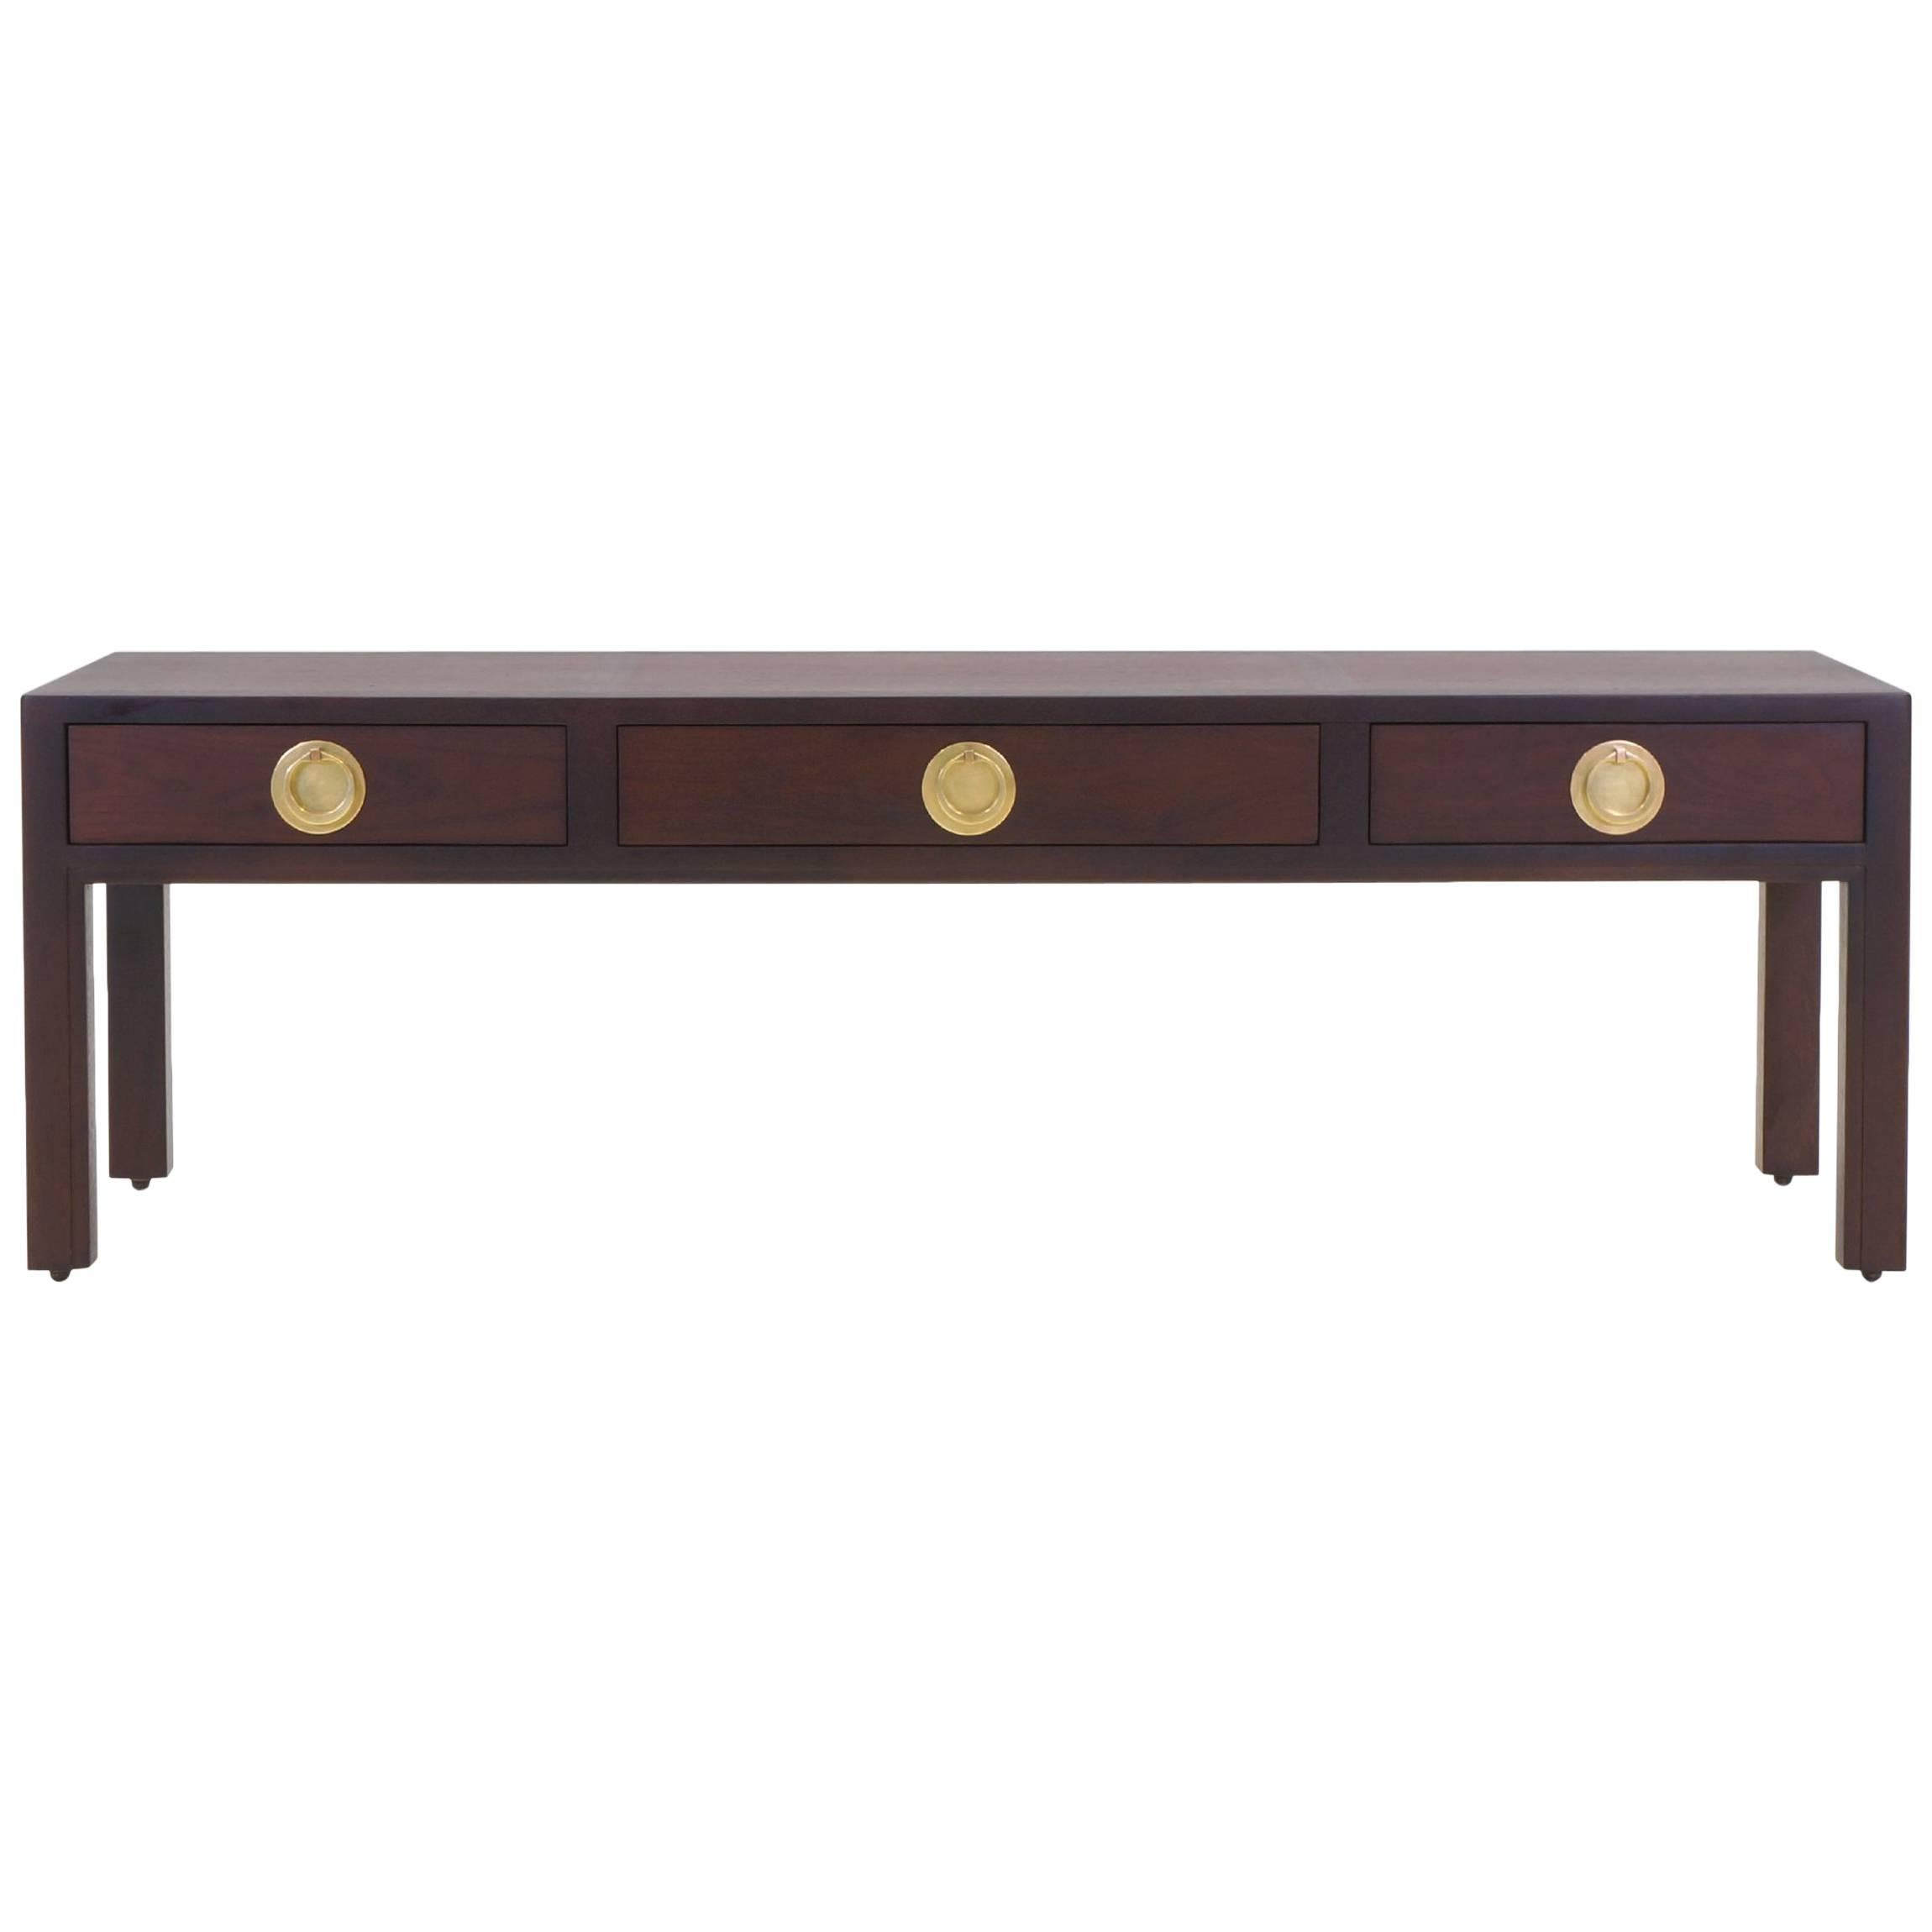 Edward Wormley for Dunbar Two Tone Mahogany and Brass Coffee Table with Drawers